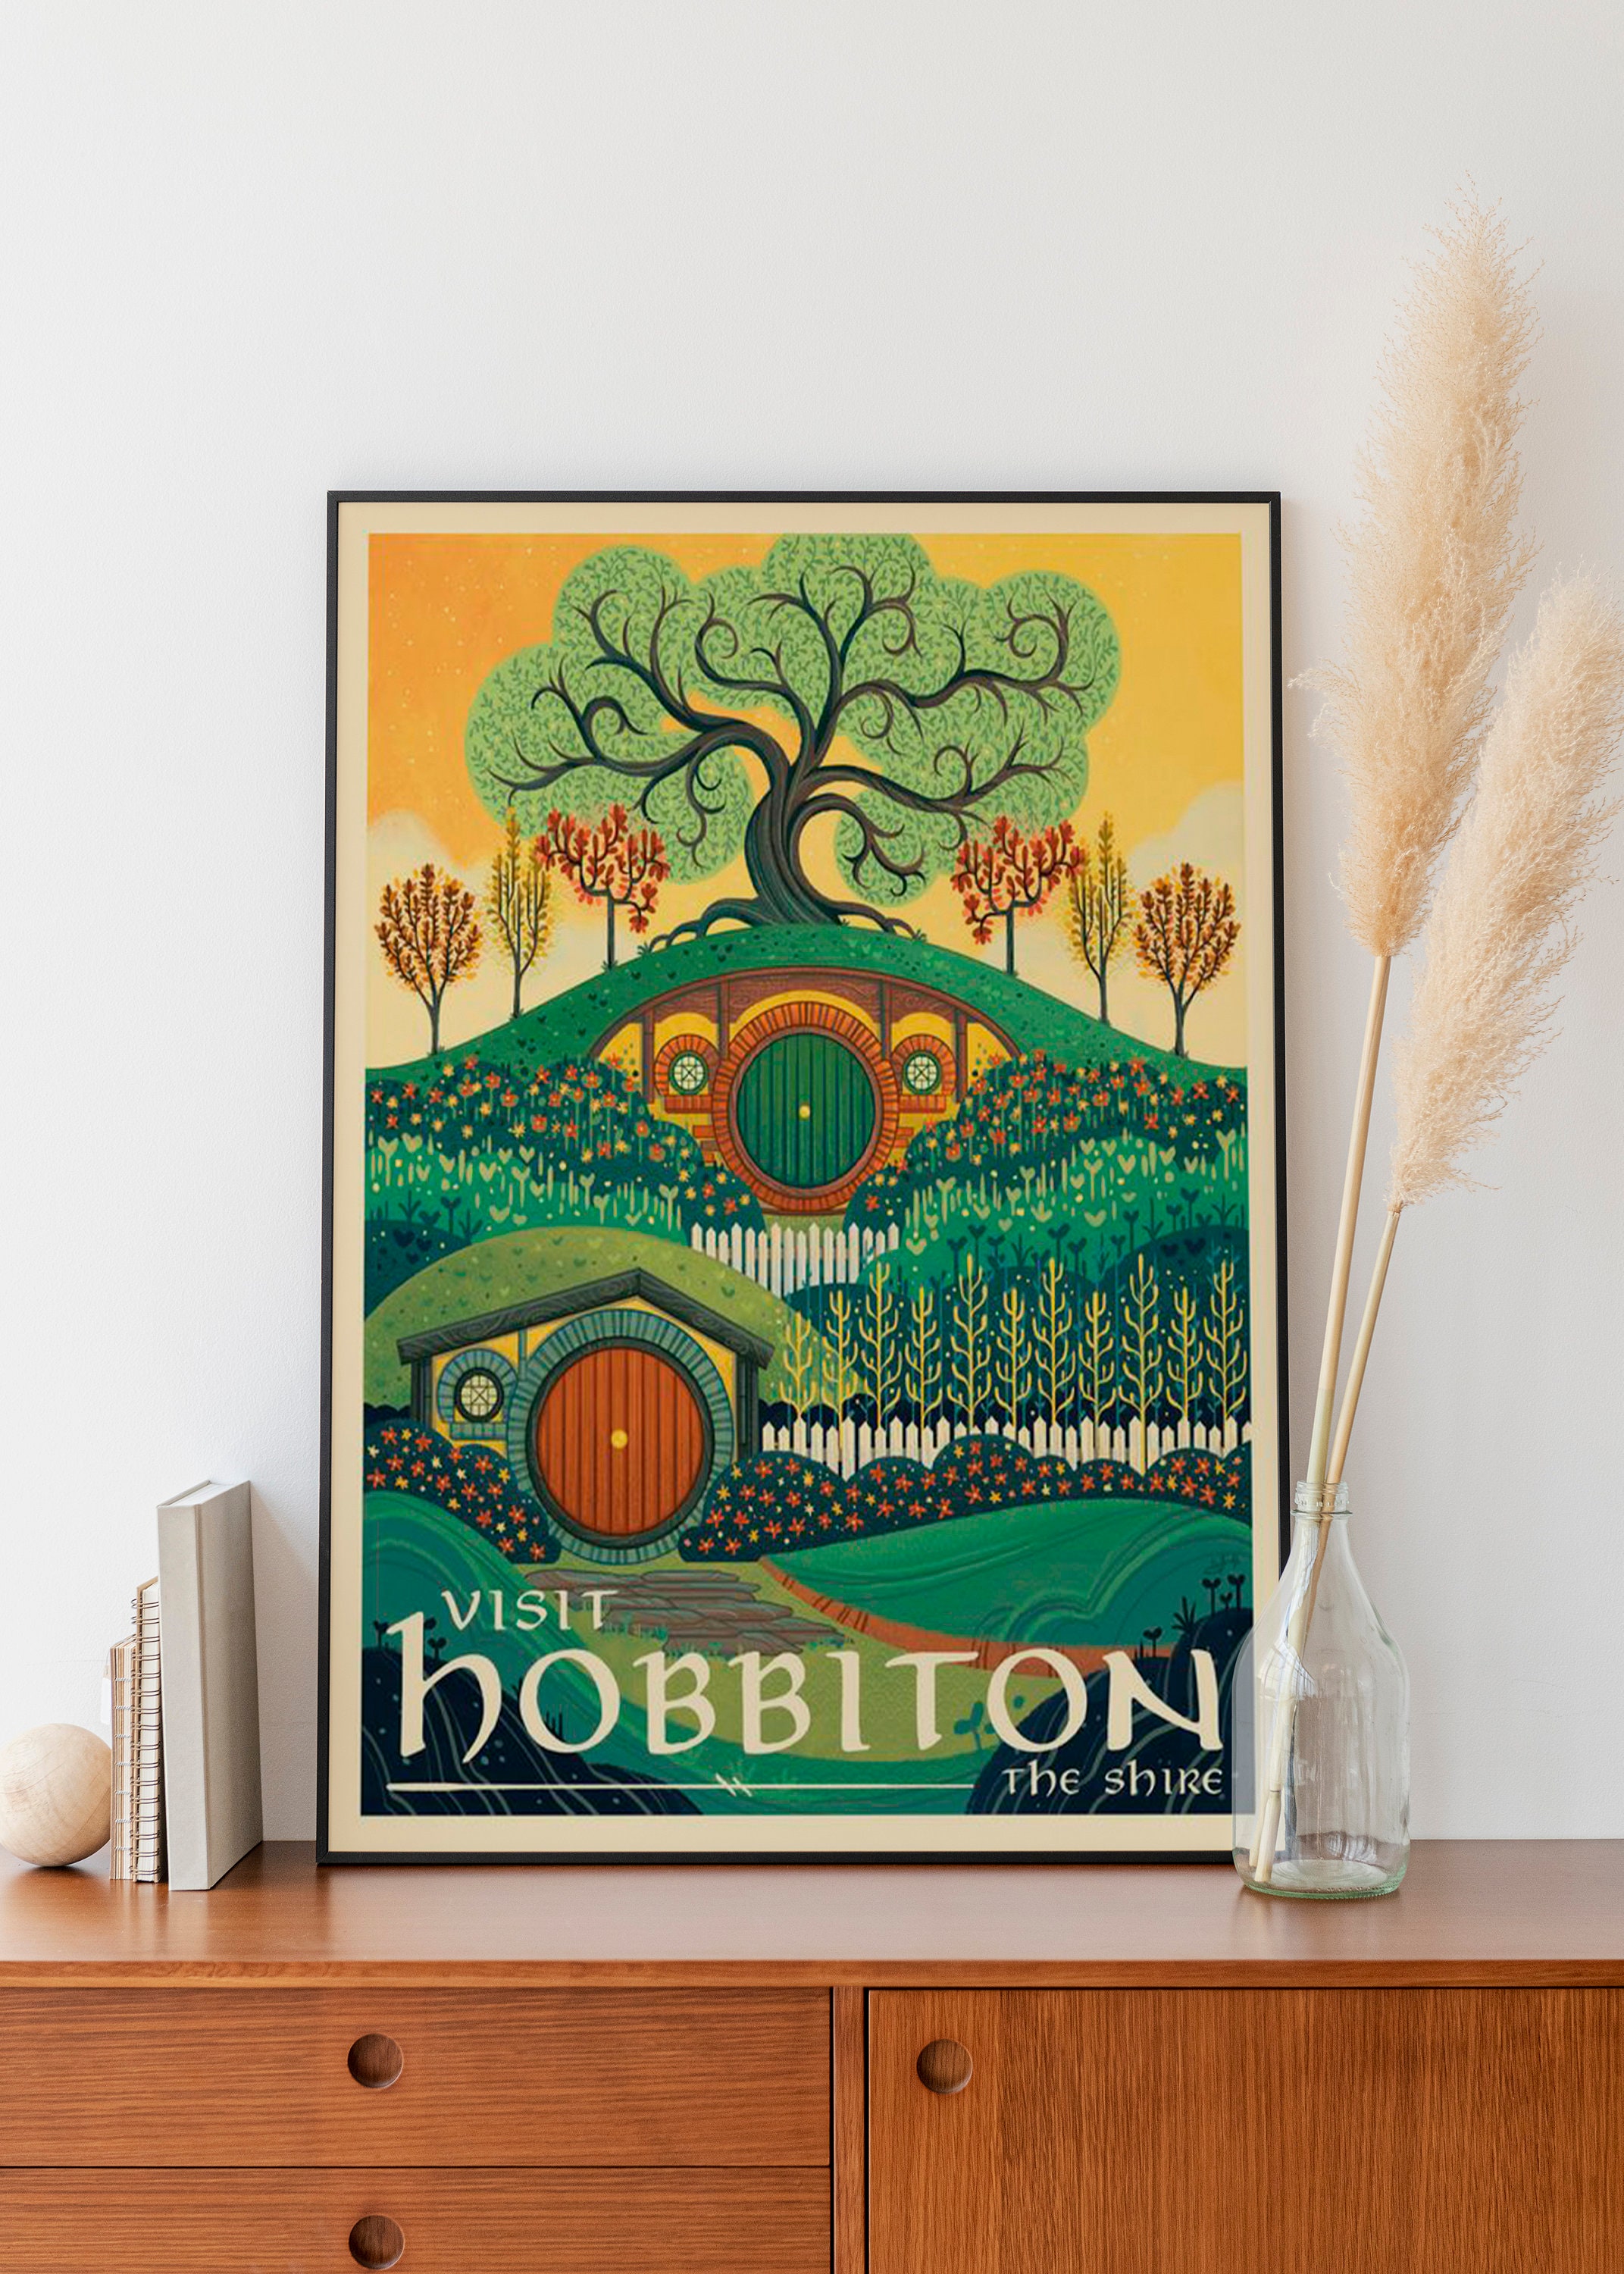 Lord of the Rings Hobbiton Art Poster sold by Gillian Graber | SKU 42175960  | 50% OFF Printerval | Poster